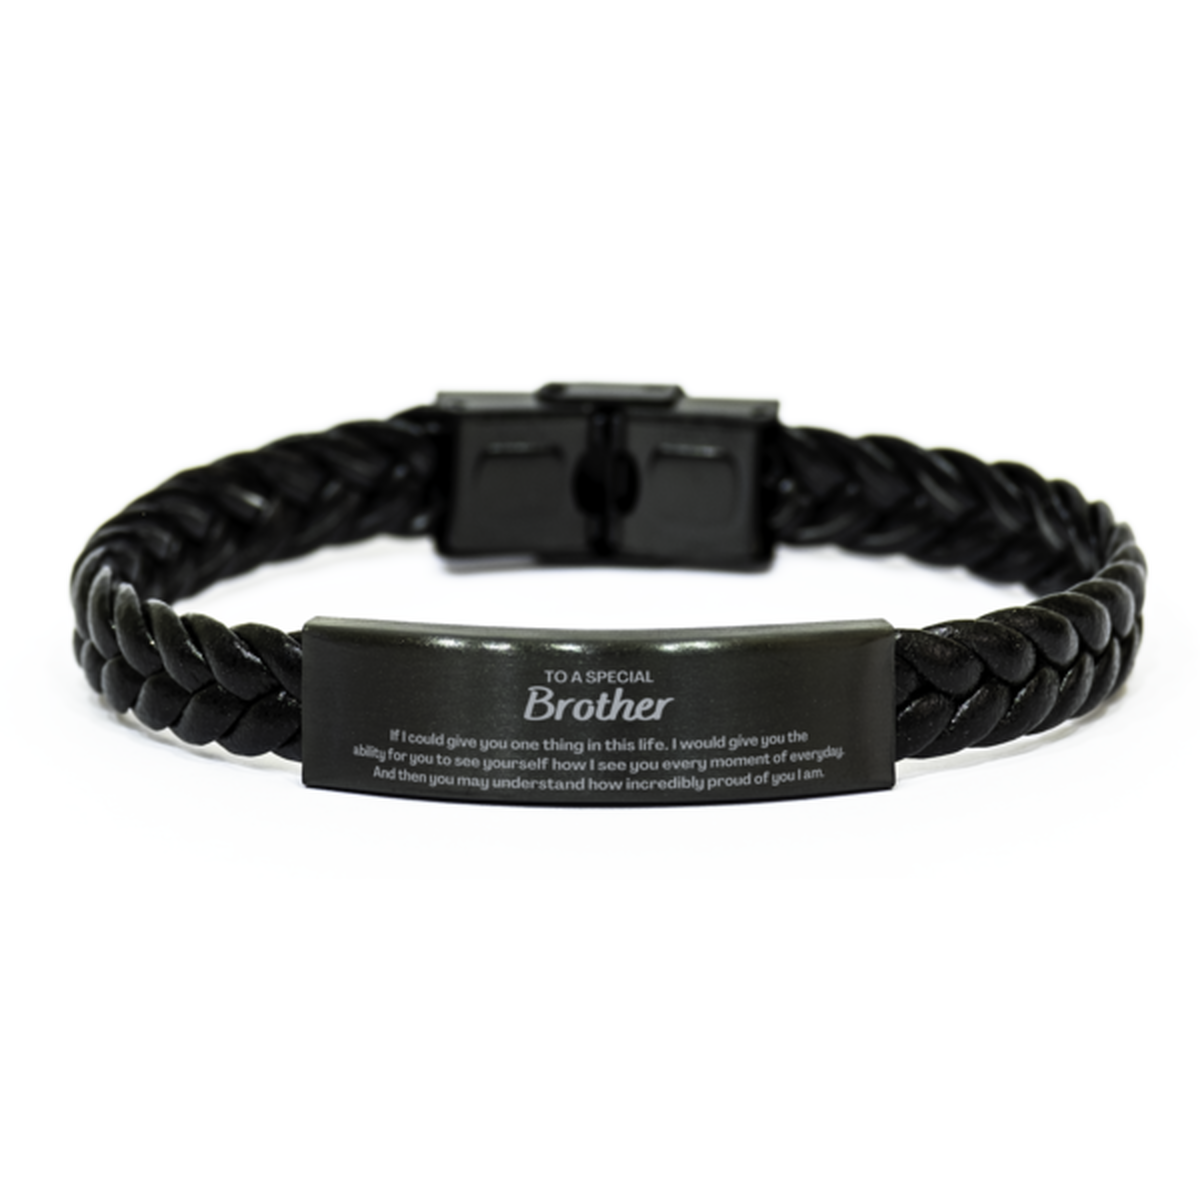 To My Brother Braided Leather Bracelet, Gifts For Brother Engraved, Inspirational Gifts for Christmas Birthday, Epic Gifts for Brother To A Special Brother how incredibly proud of you I am